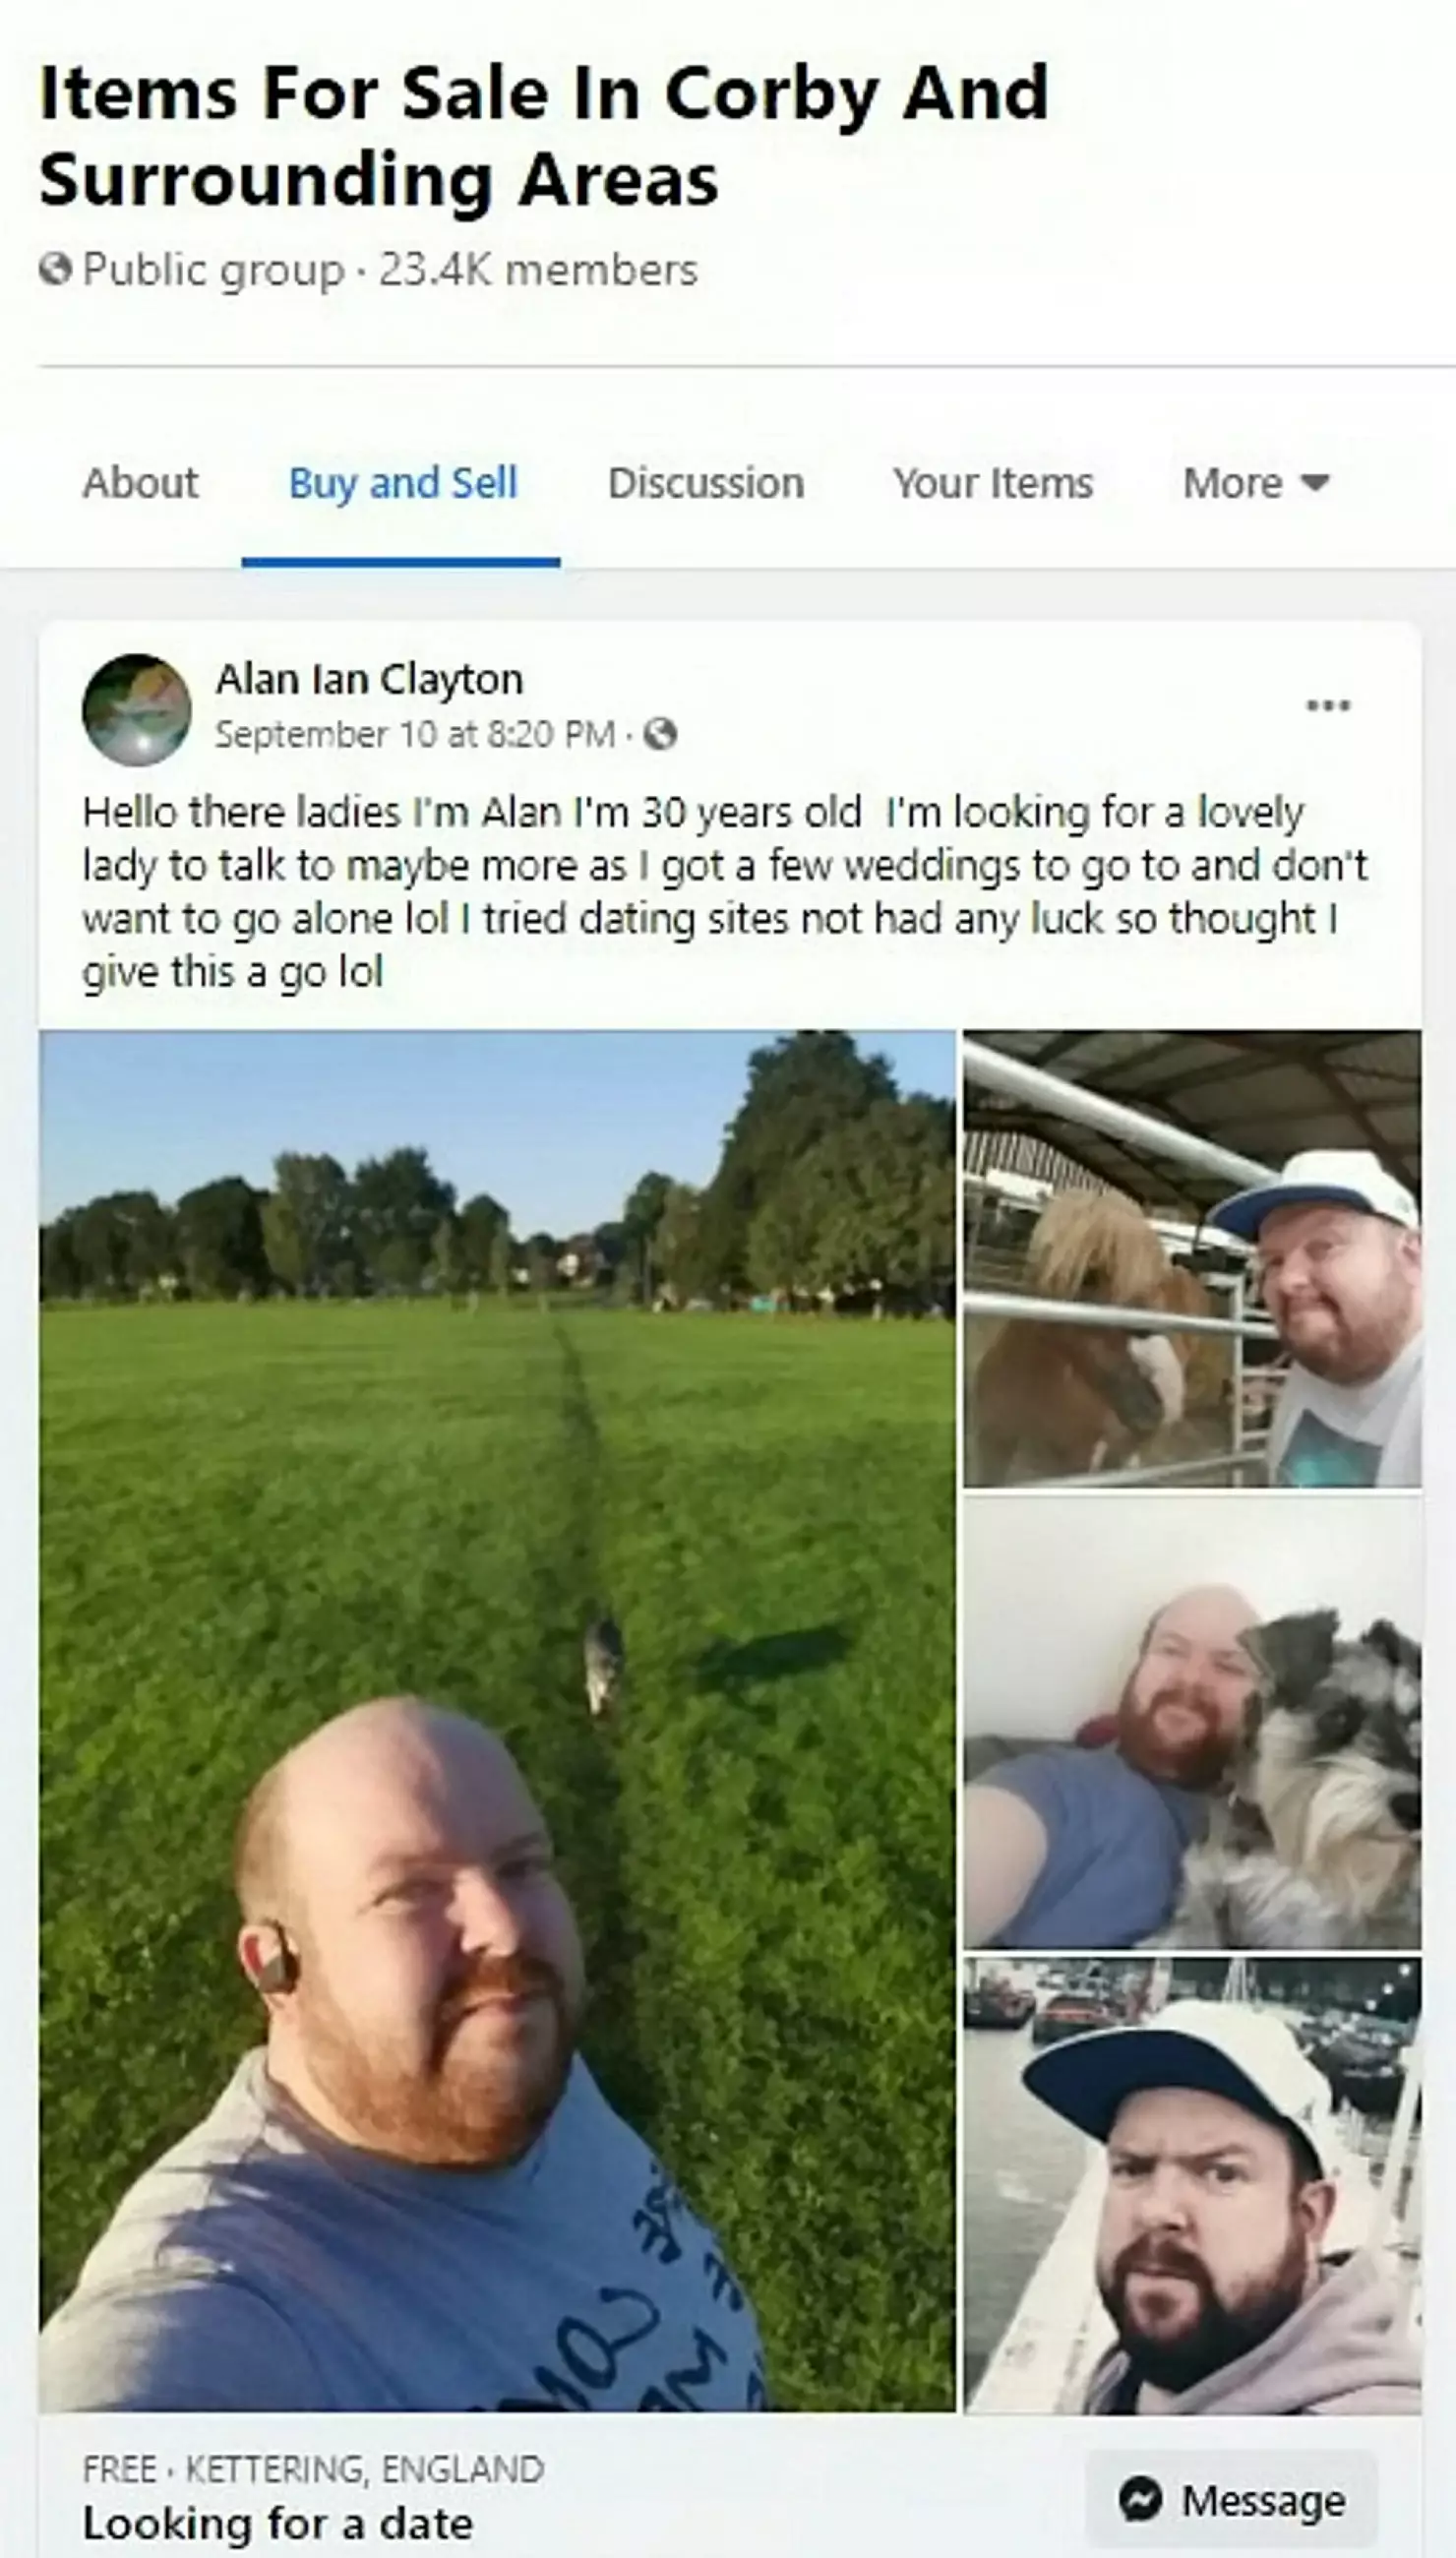 Alan posted his dating ad on Facebook (